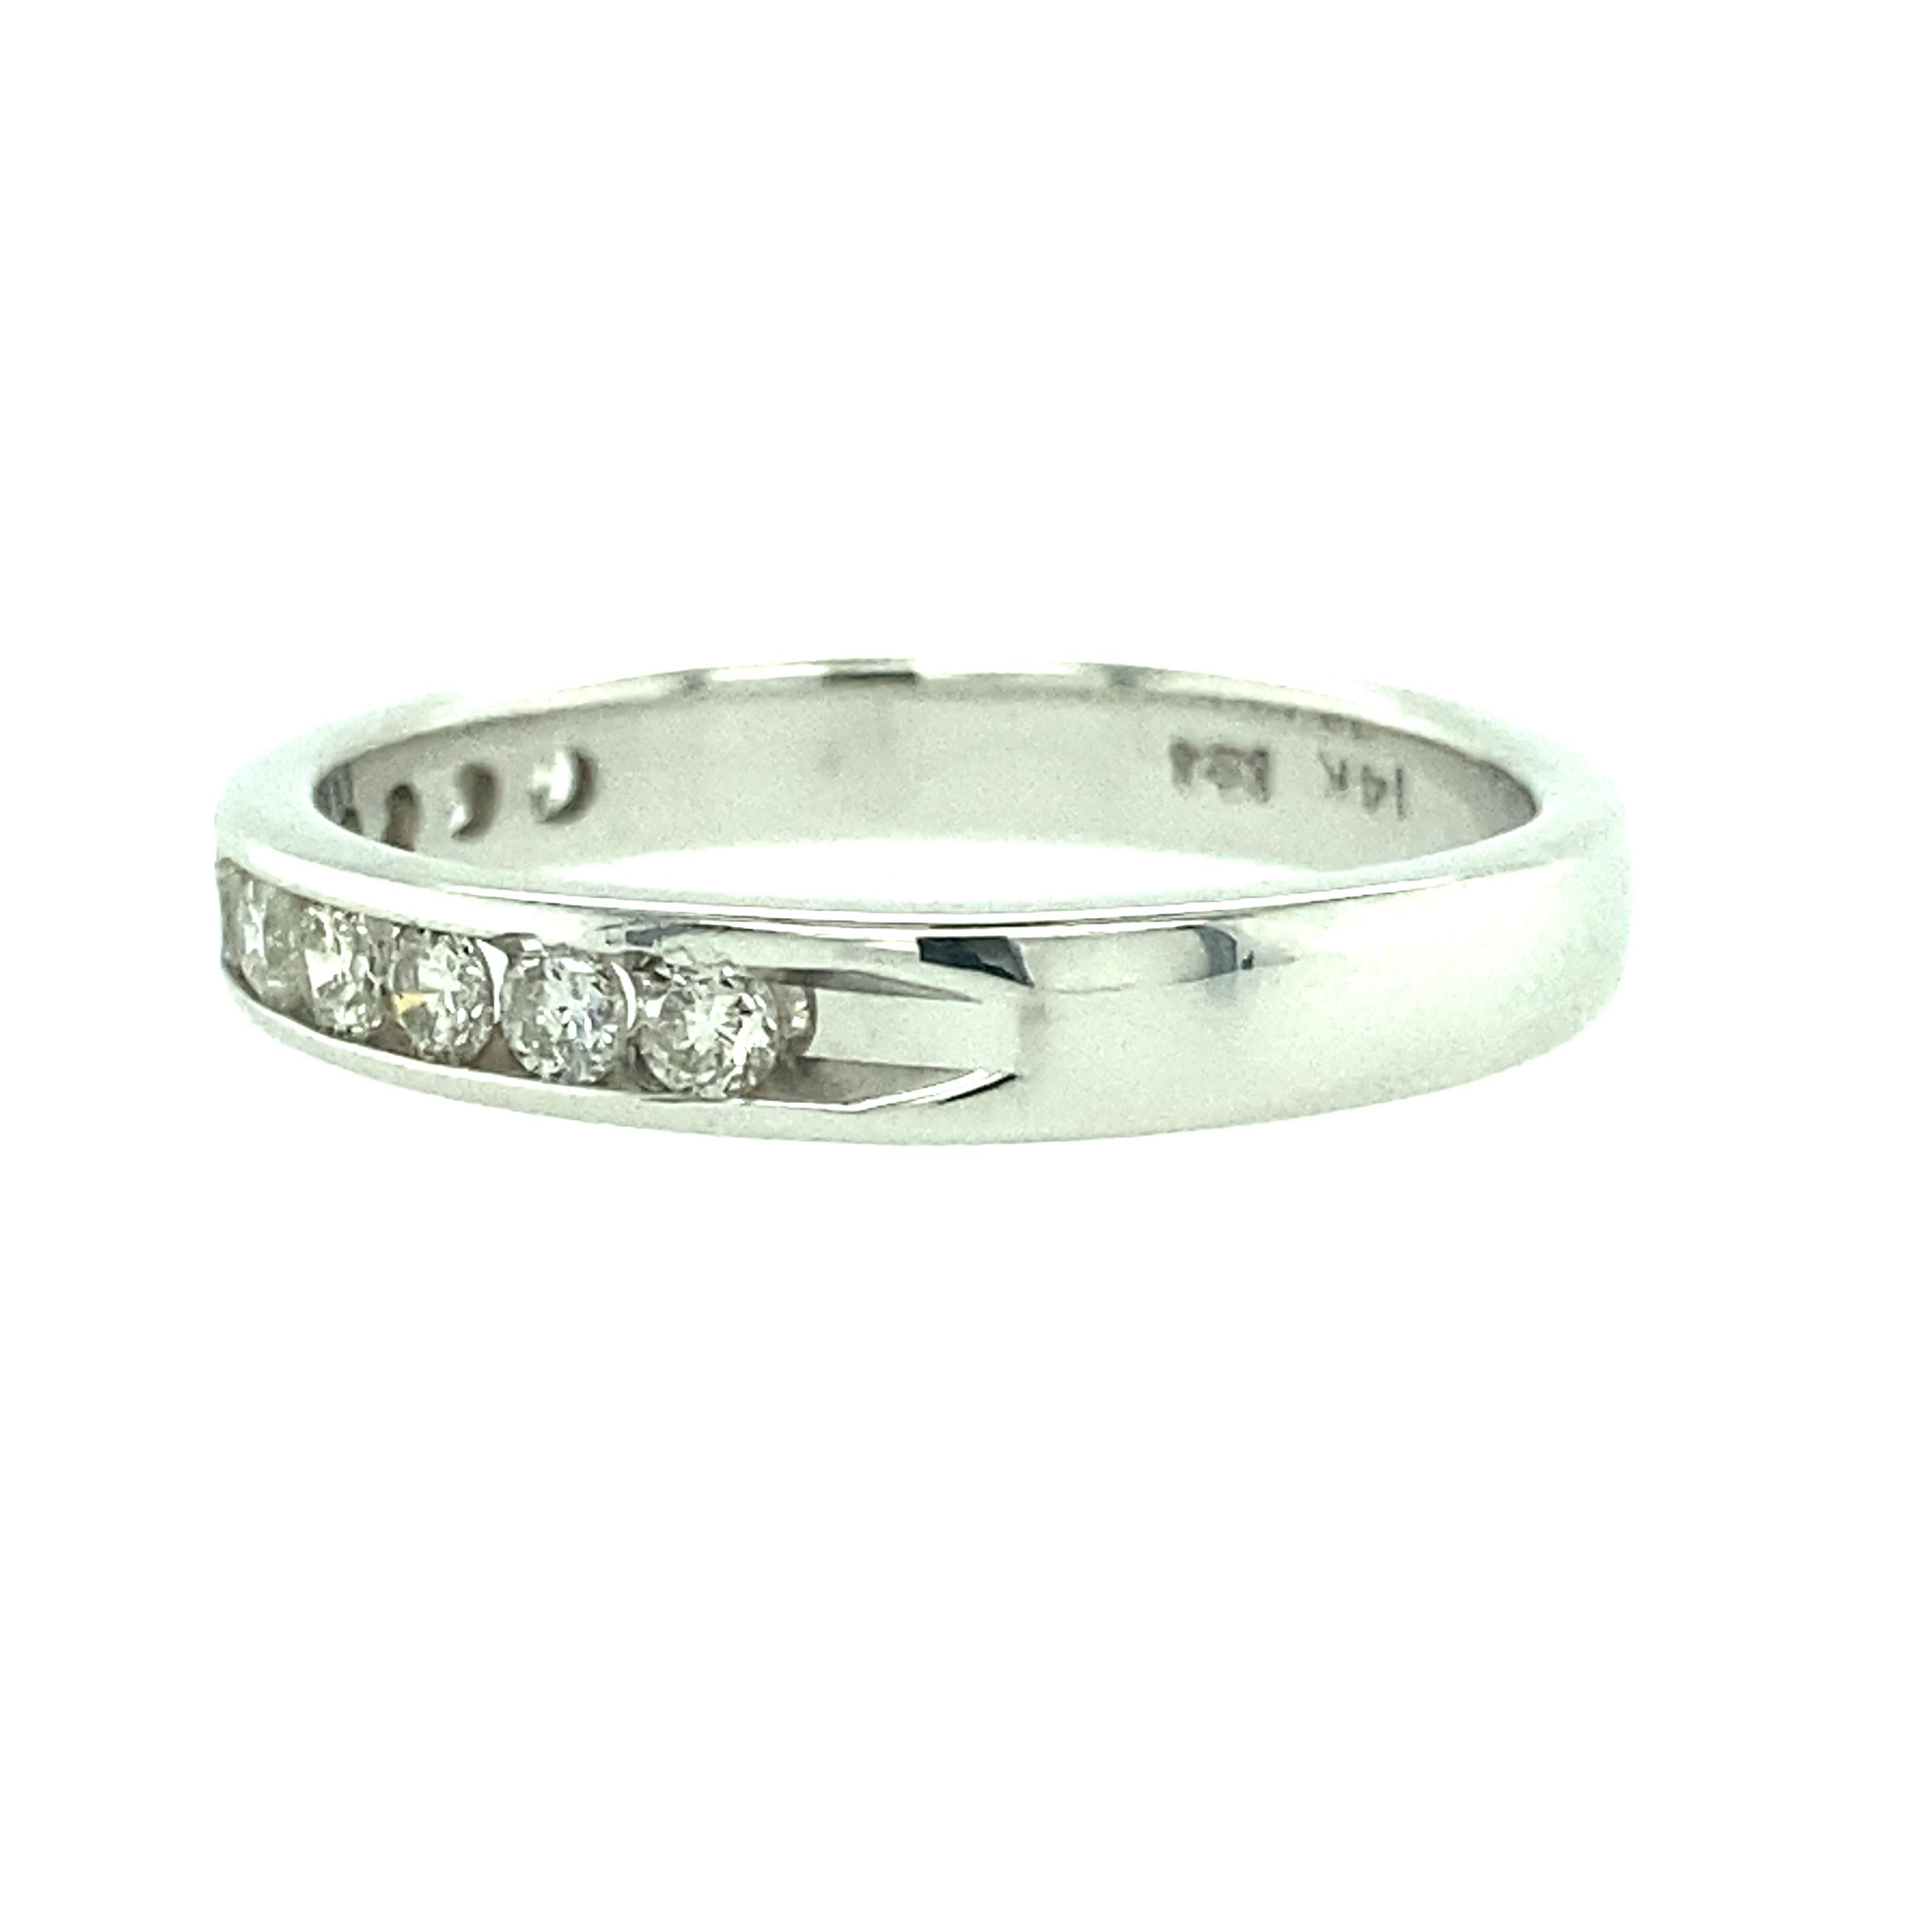 One 14 karat white gold (stamped 14K with hallmark) 3.30mm wide estate diamond wedding band set with eleven channel set diamonds, 0.33 carat total weight with matching 0.33 carat total weight with matching I/J color and SI clarity. Finger size 8.25